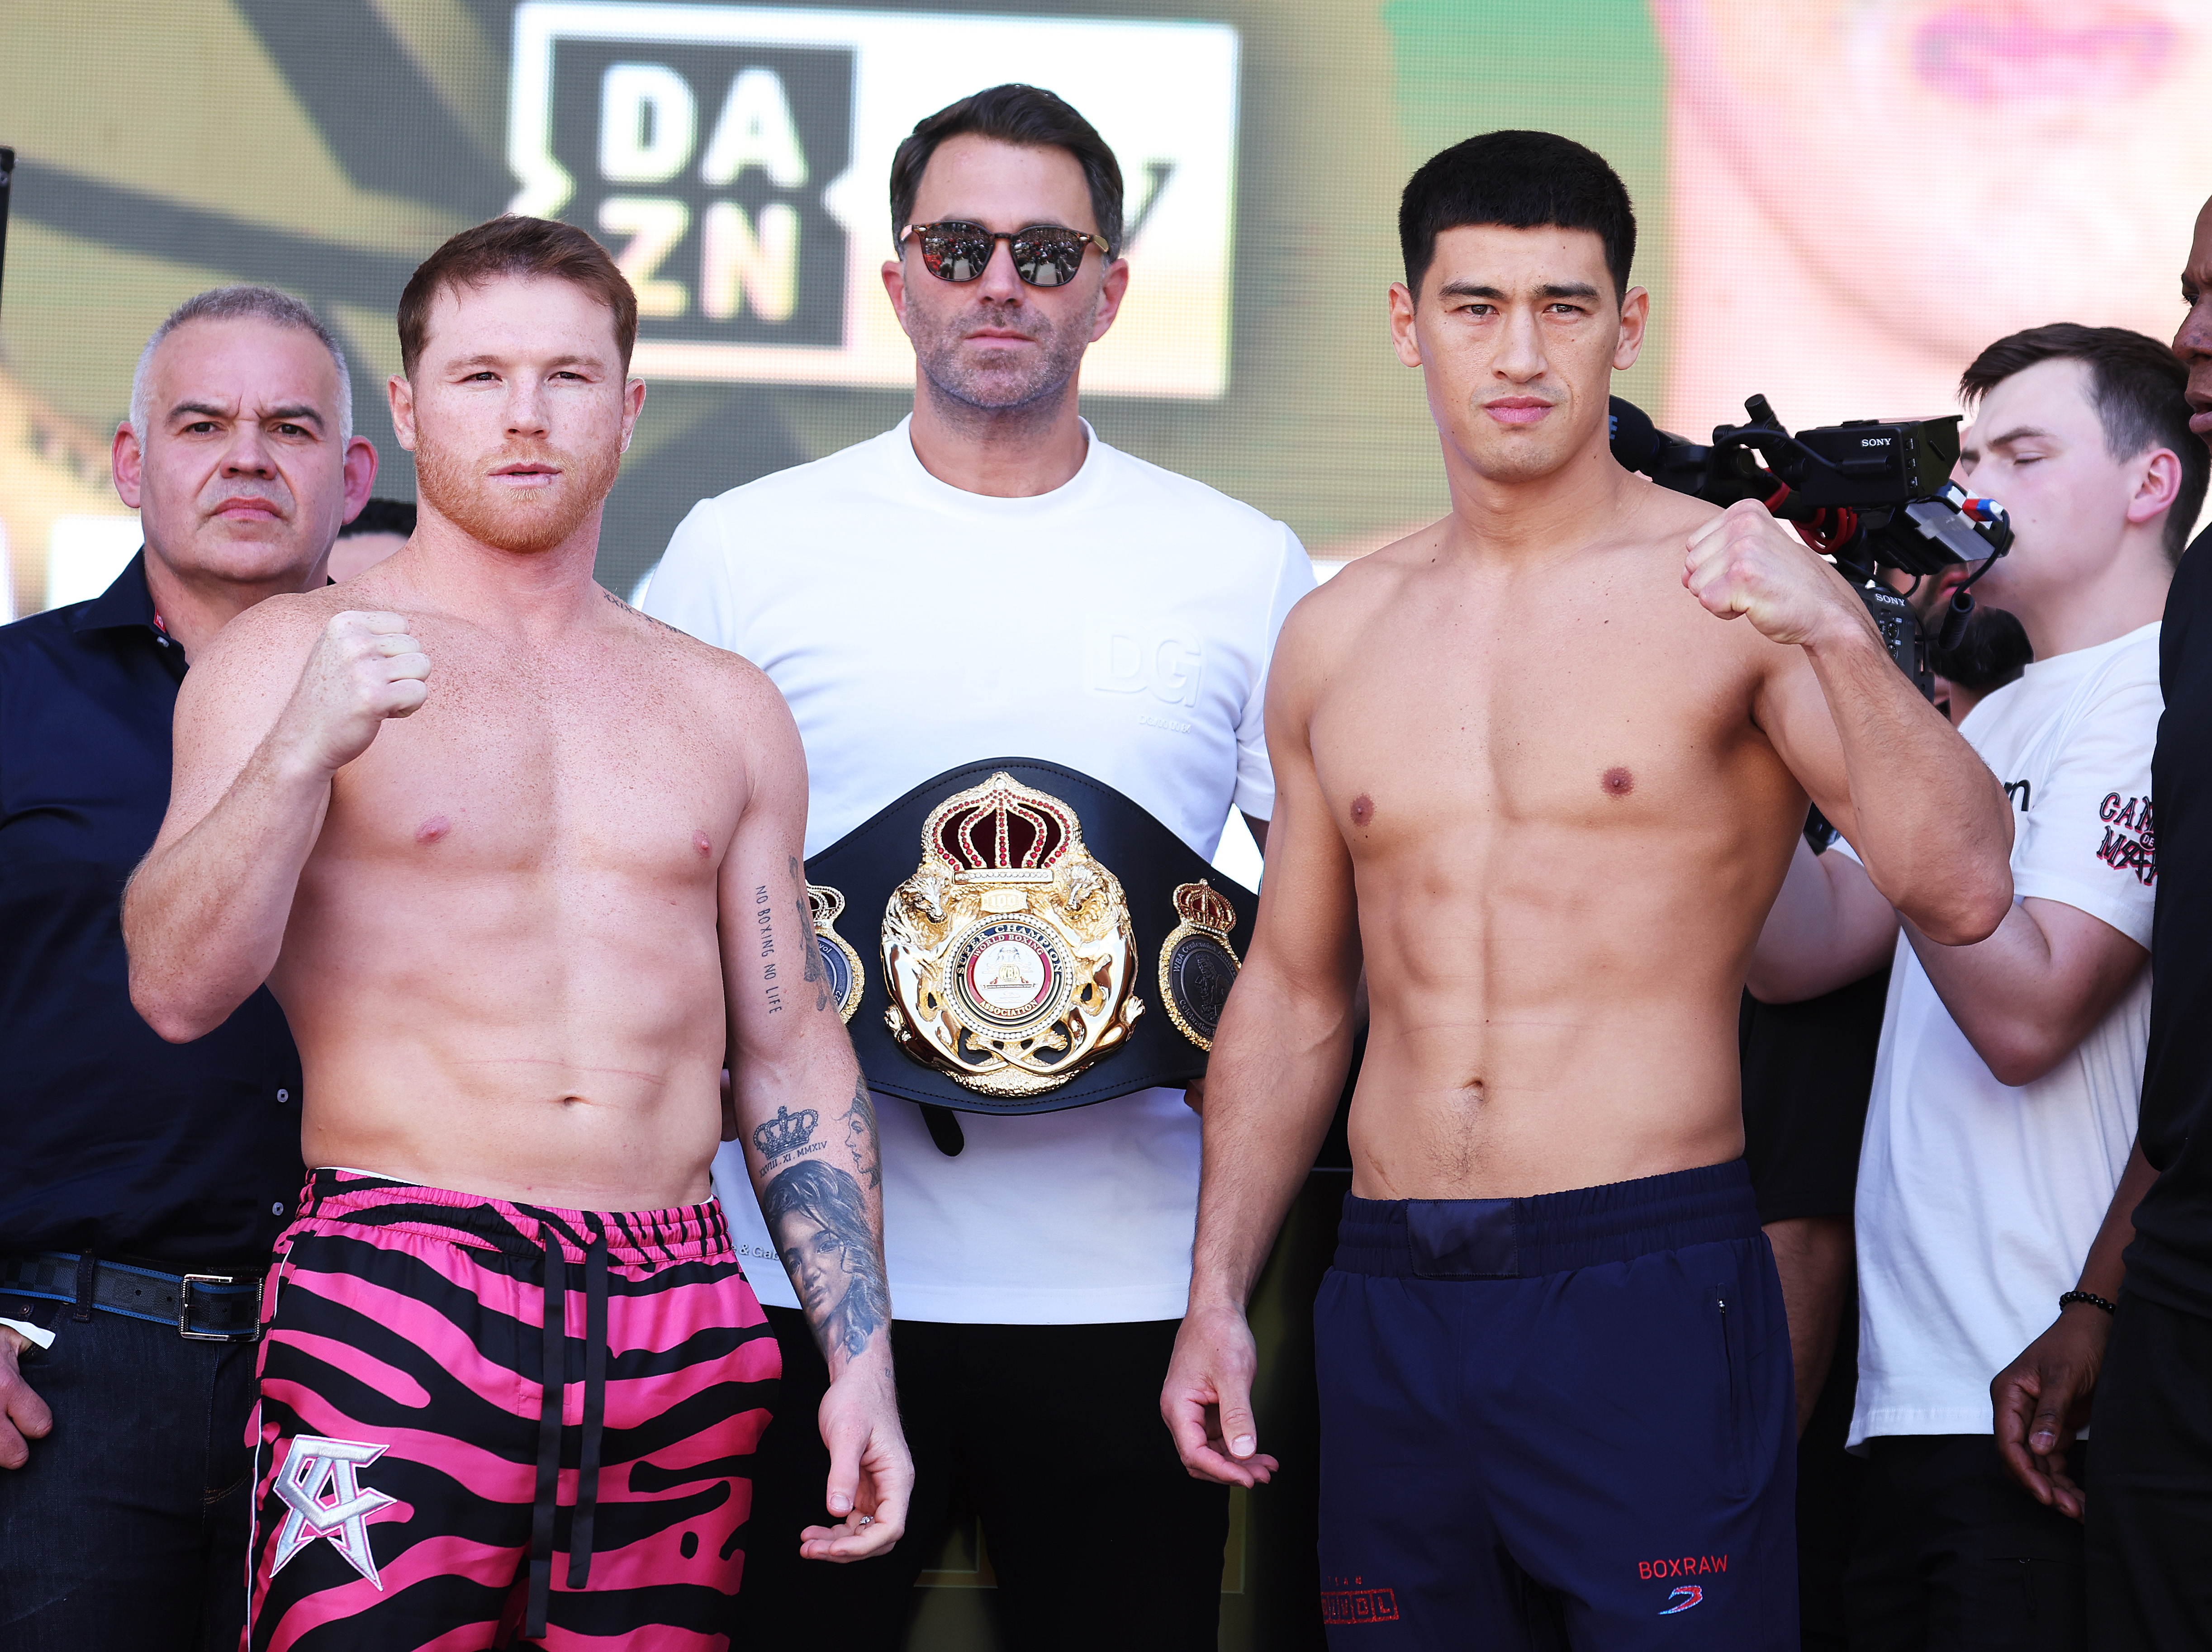 LAS VEGAS, NEVADA - MAY 06:  Canelo Alvarez (L) and WBA light heavyweight champion Dmitry Bivol face off during a ceremonial weigh-in at Toshiba Plaza on May 06, 2022 in Las Vegas, Nevada. Bivol will defend his title against Alvarez at T-Mobile Arena in Las Vegas on May 7. (Photo by Al Bello/Getty Images)